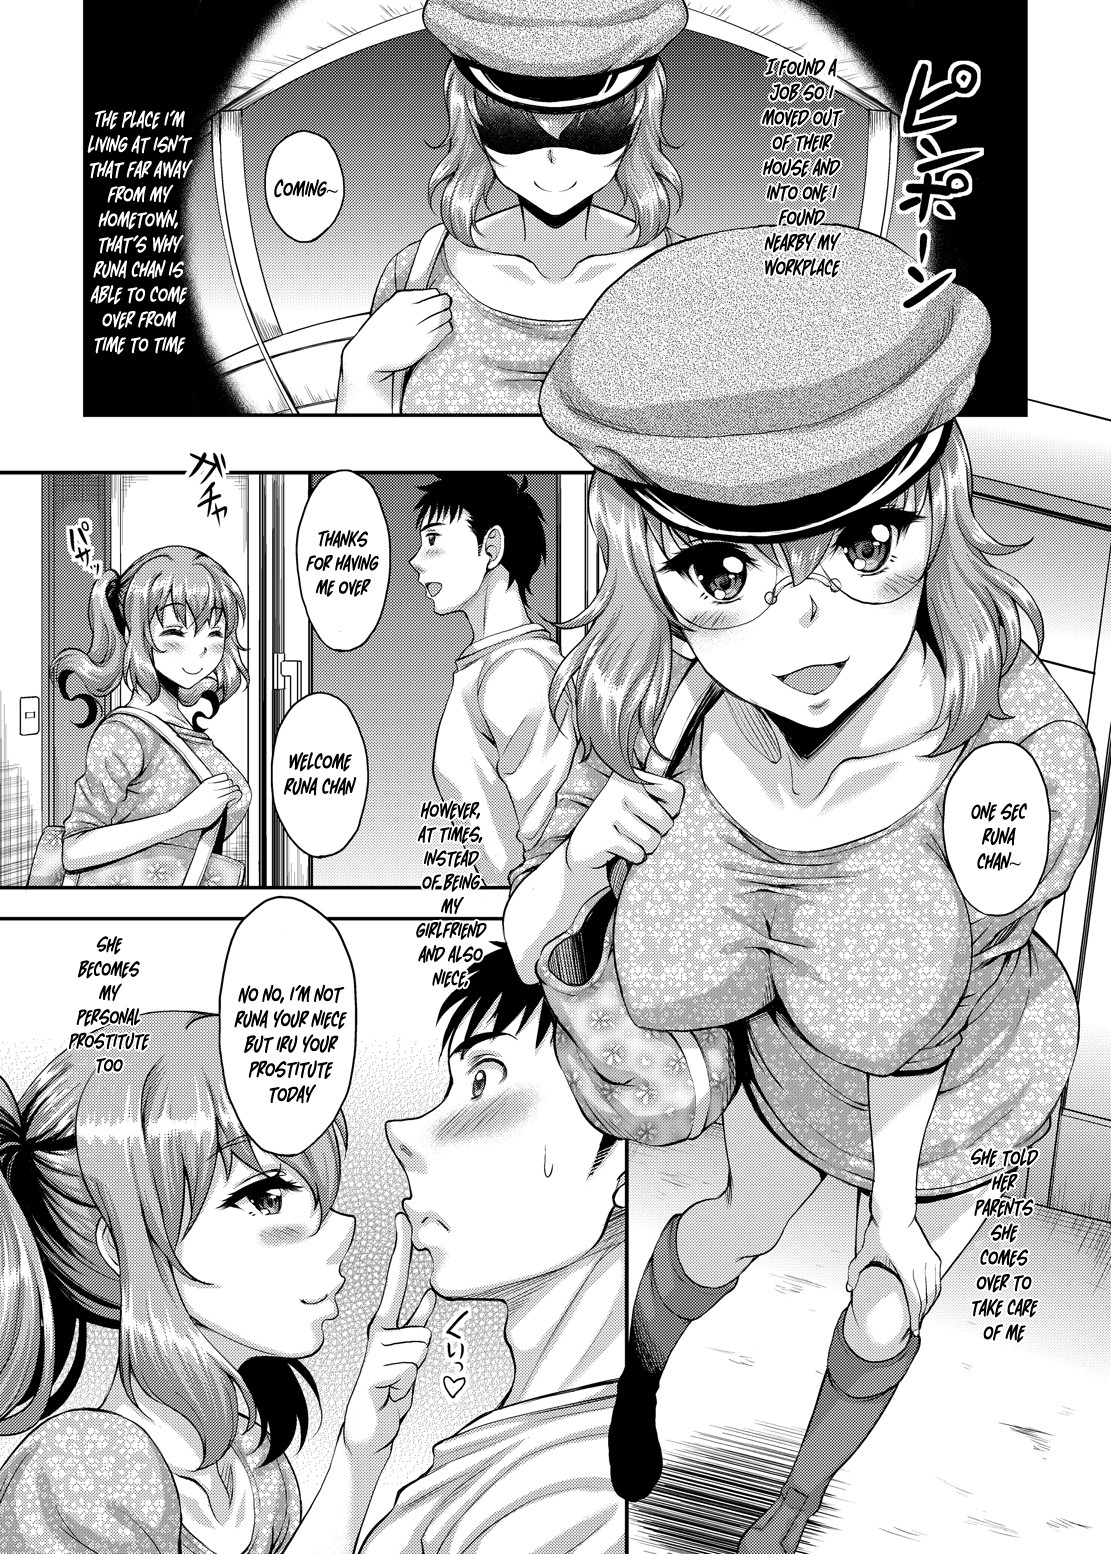 Hentai Manga Comic-Is It True That There Is A Custom That There Is a Loli-Faced Niece Big Breasted Schoolgirl? 3-Read-2